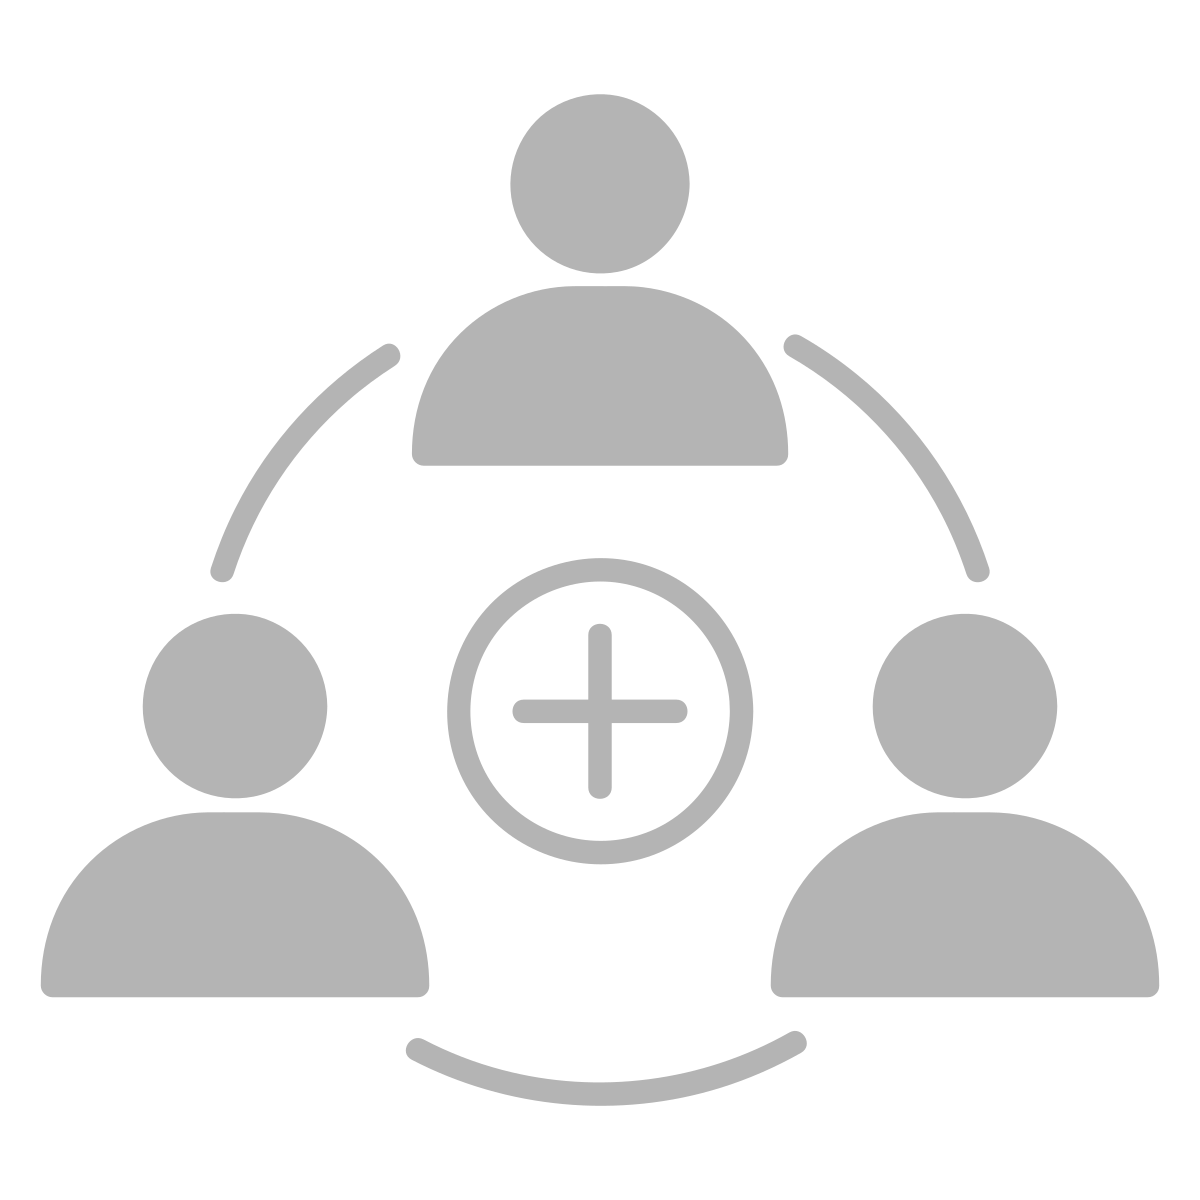 Icon showing the heads and shoulders of 3 people with curved lines between them to make a complete circle. Thee is a plus sign in the centre.